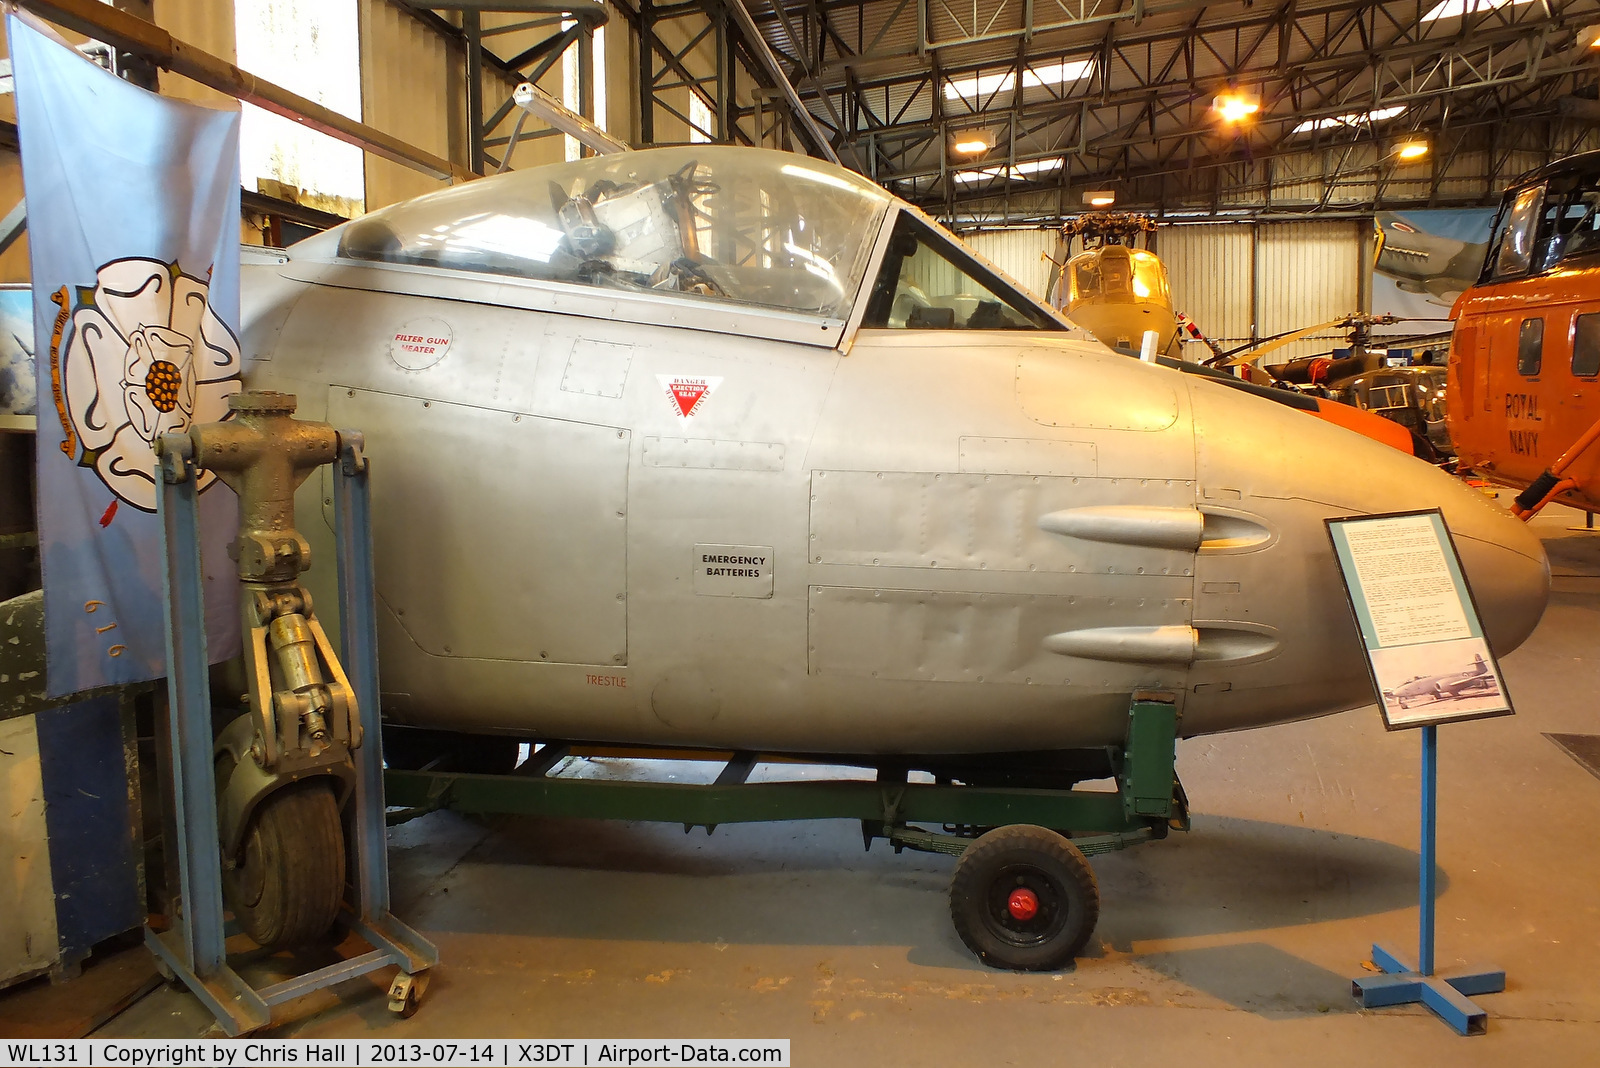 WL131, 1953 Gloster Meteor F8 C/N Not found WL131, preserved at the South Yorkshire Aircraft Museum, AeroVenture, Doncaster